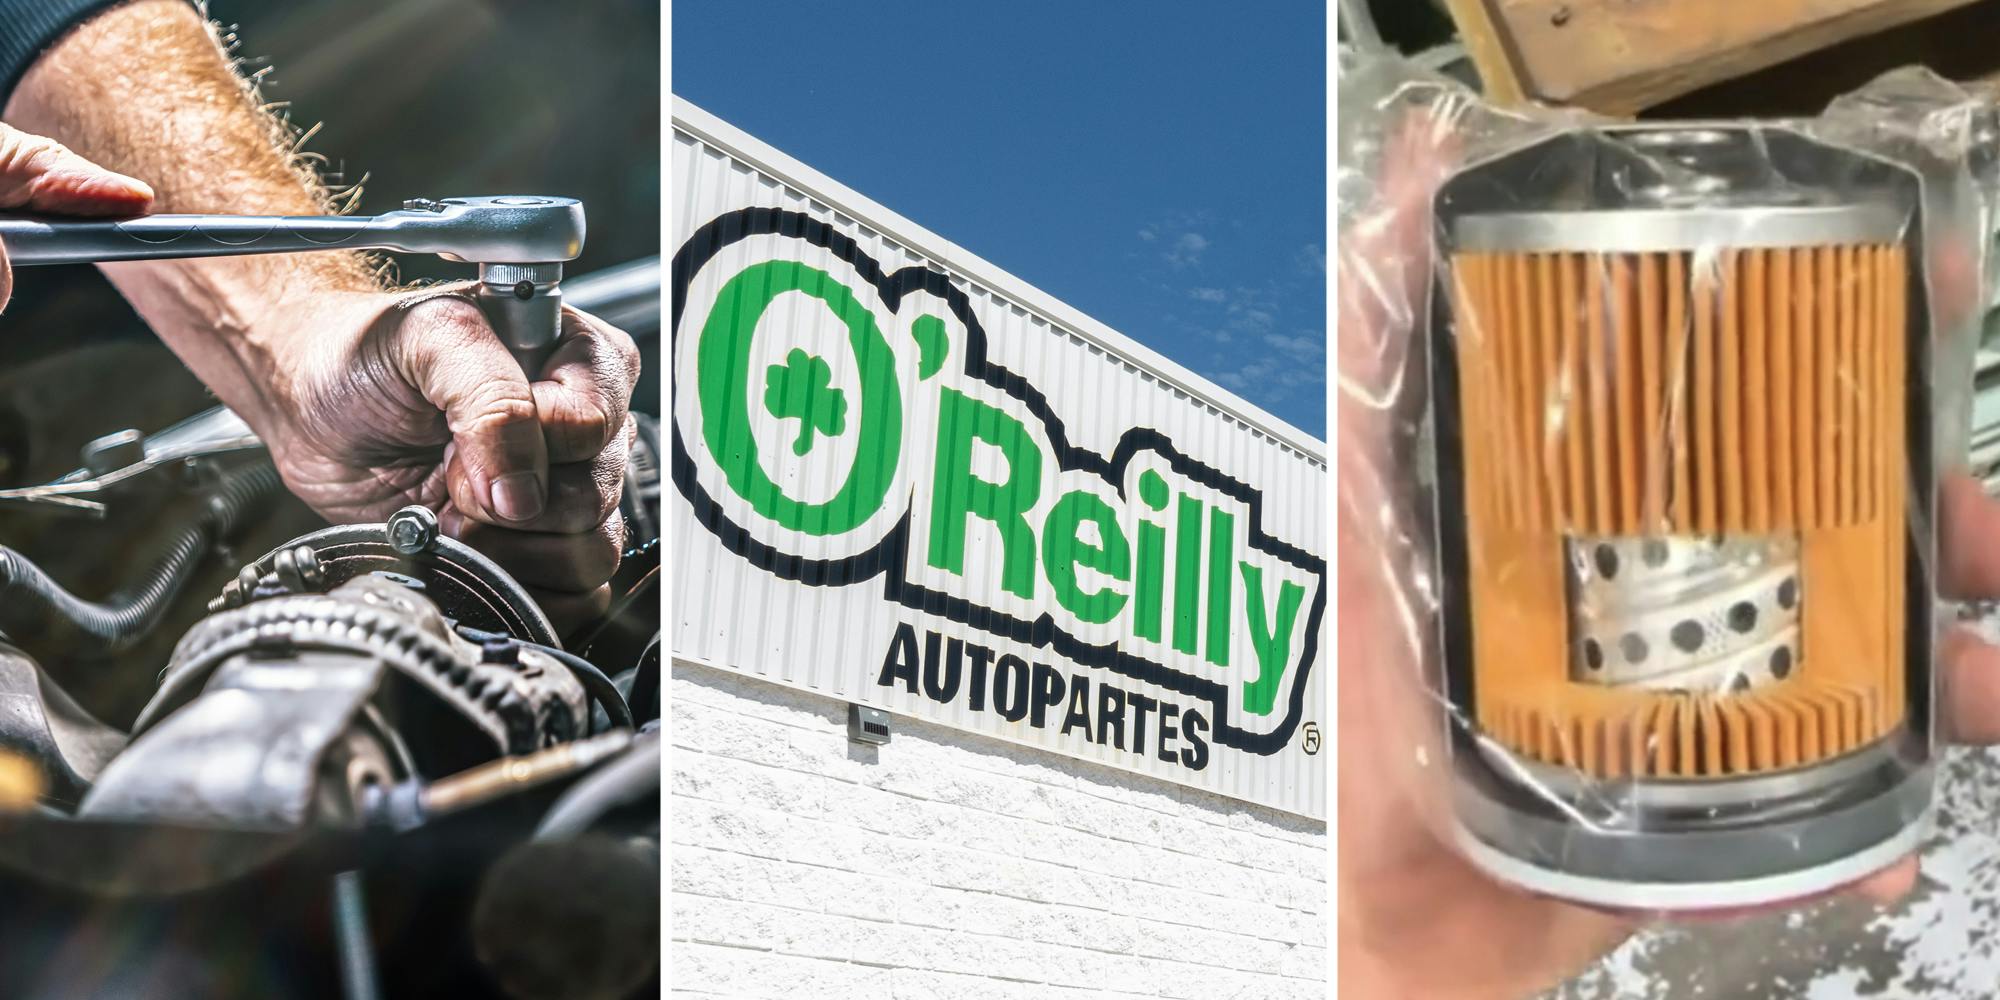 Mechanic(l), O'Reilly Autopartes sign(c), Oil filter(r)